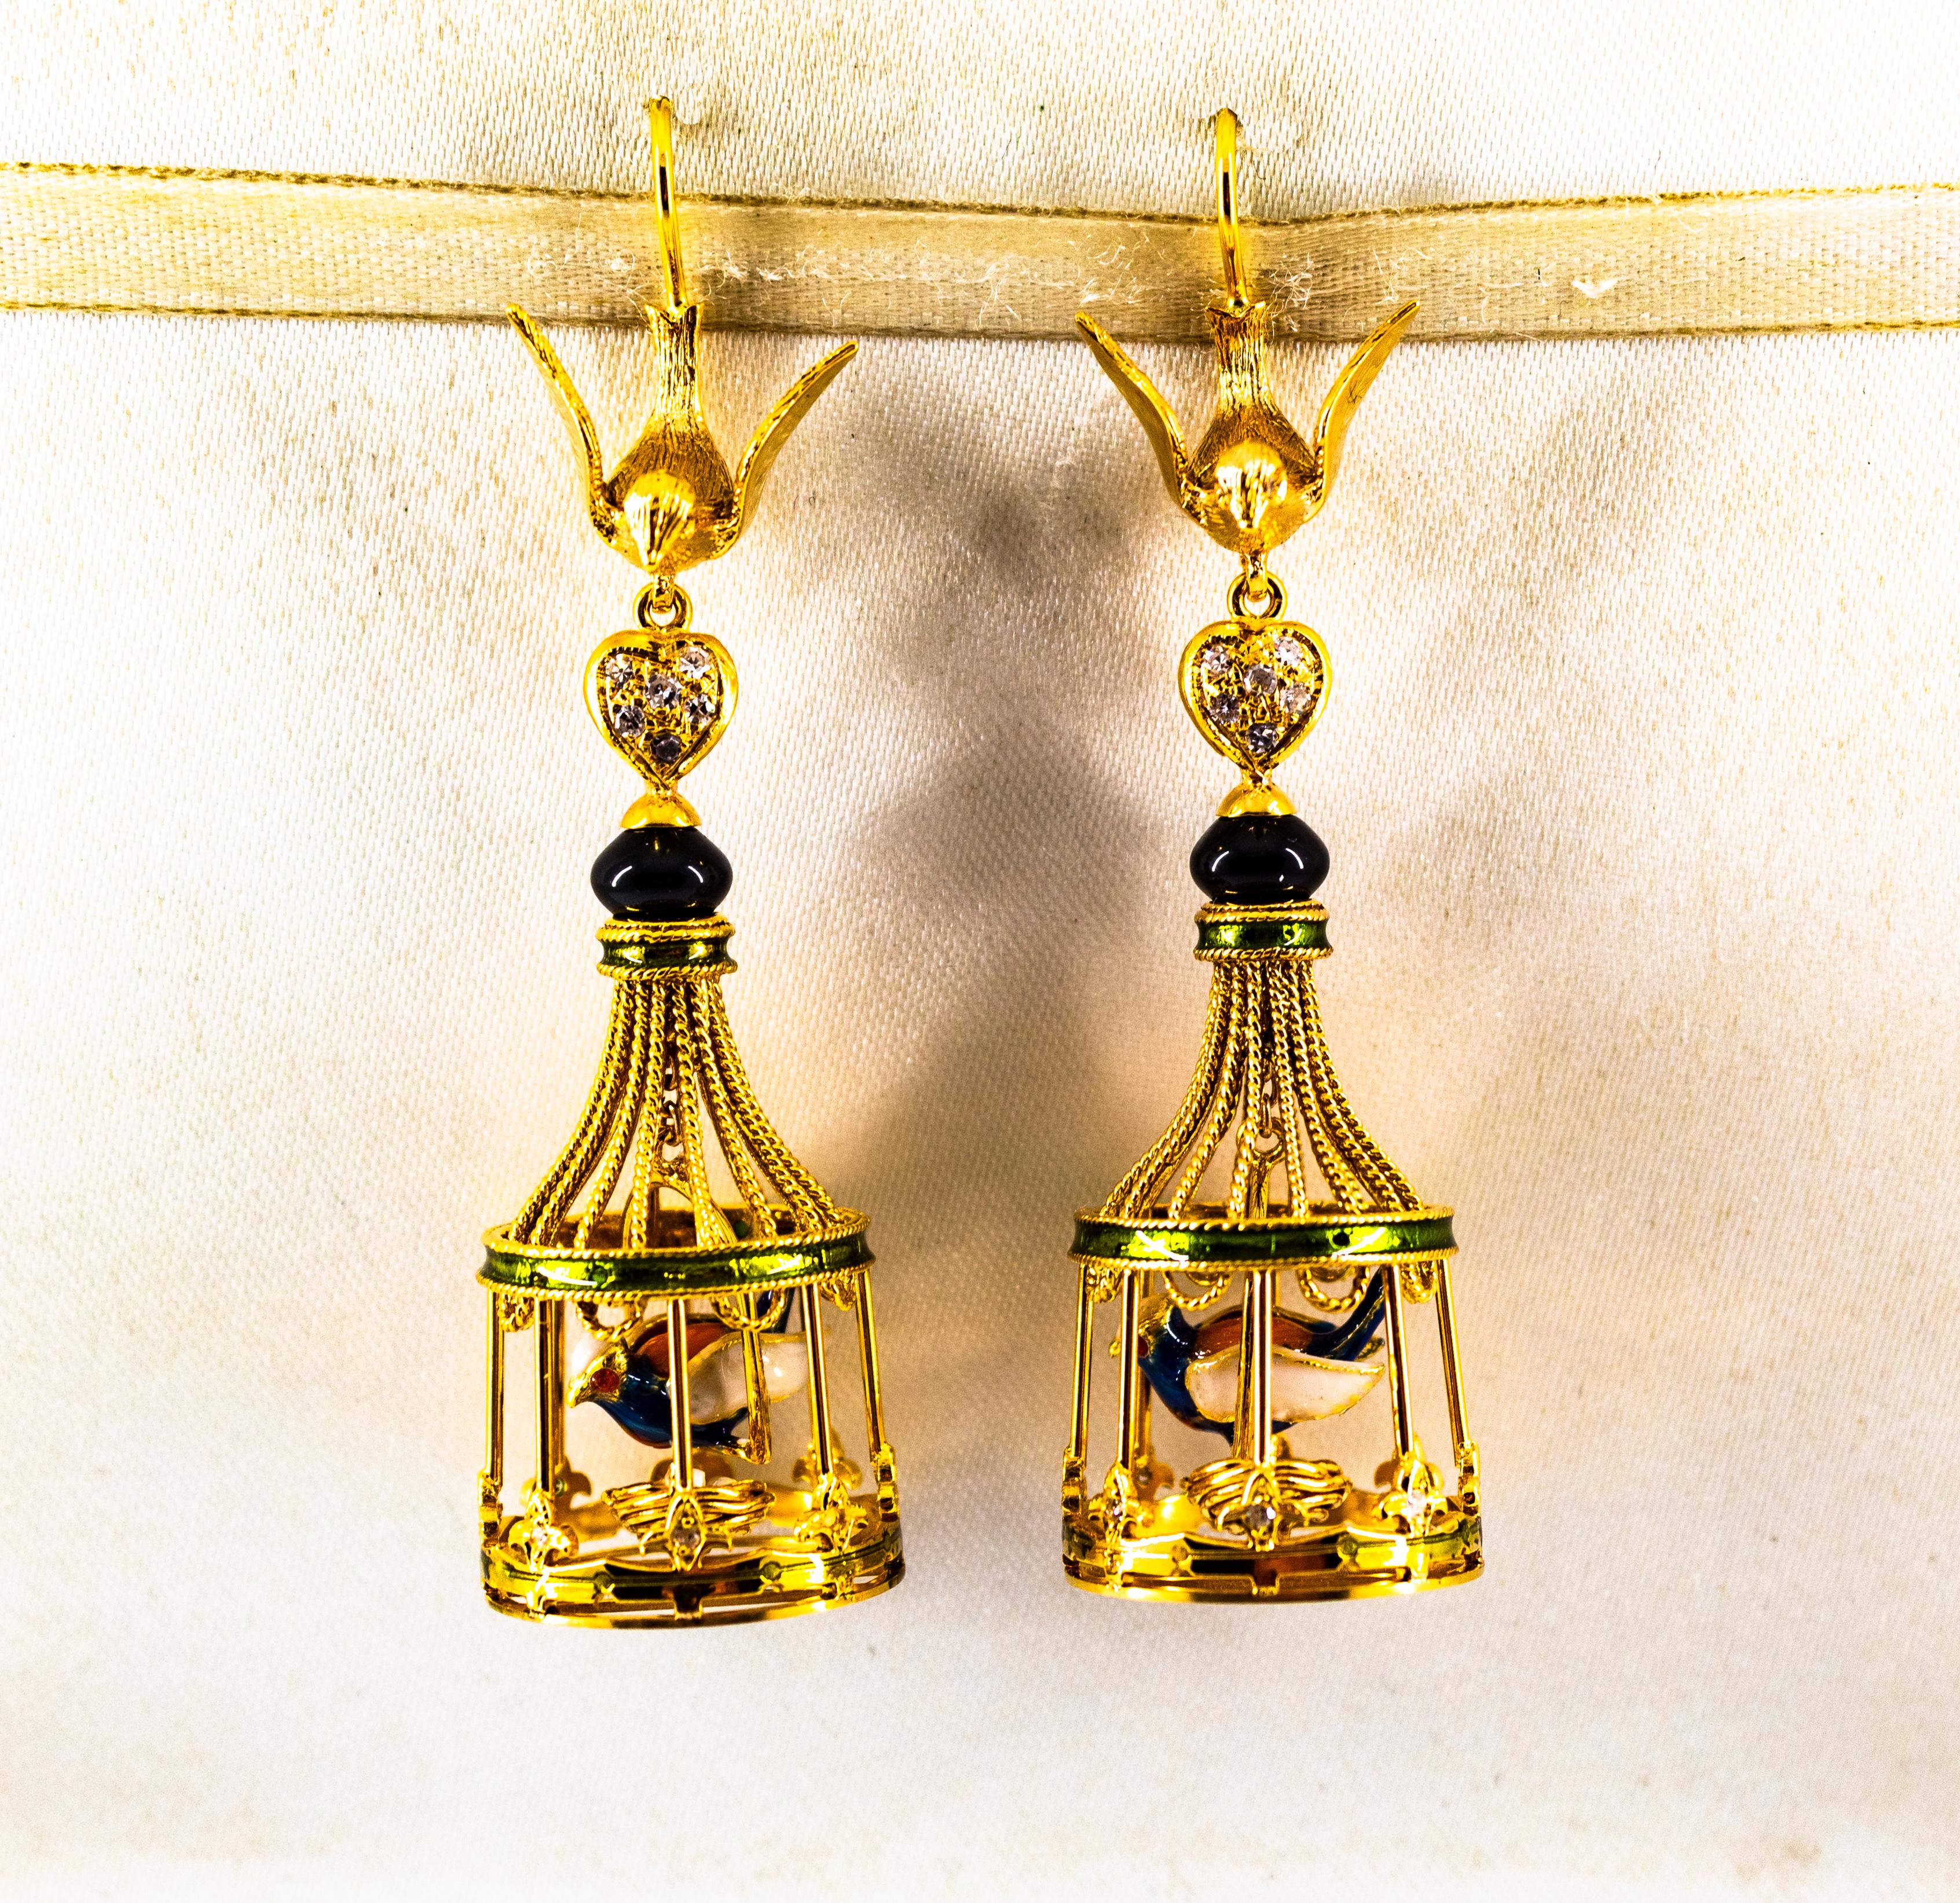 These Stud Earrings are made of 9K Yellow Gold.
These Earrings have 0.30 Carats of White Diamonds.
These Earrings have Onyx.
These Earrings have also Mediterranean (Sardinia, Italy) Red Coral, Enamel and Pearls.
All our Earrings have pins for